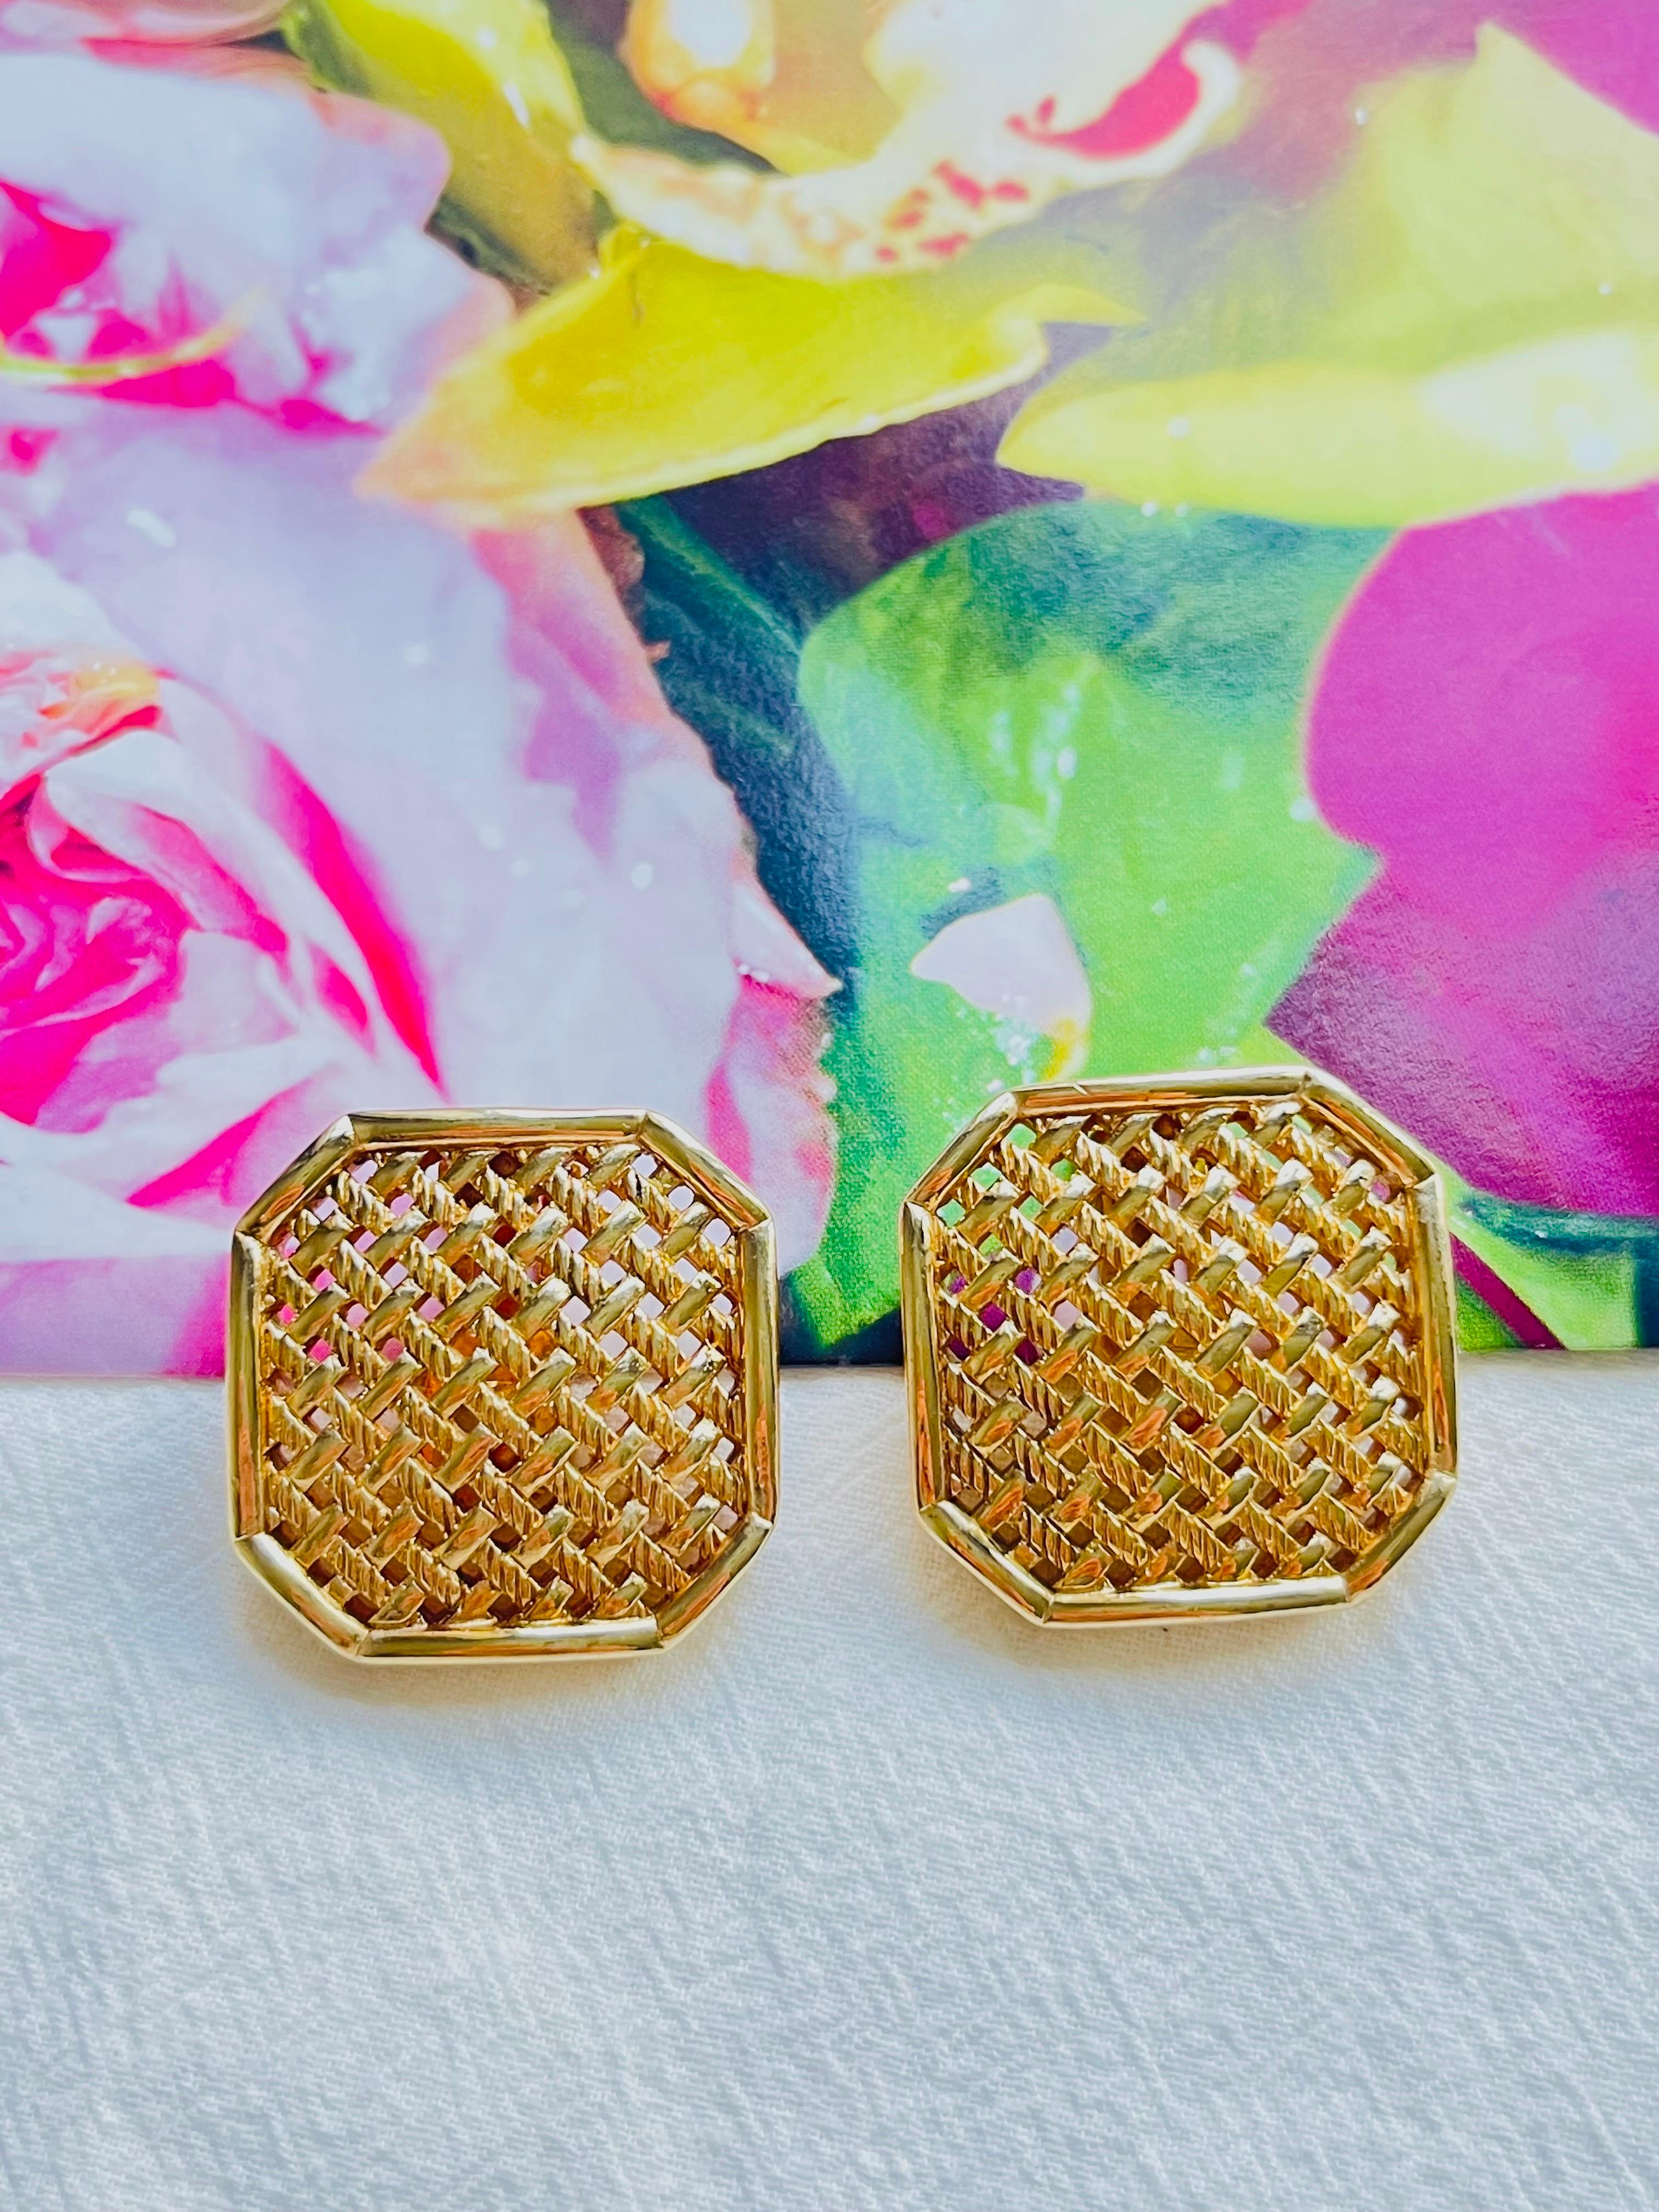 Christian Dior Vintage Large Octagon Square Openwork Mesh Statement Modernist Clip Earrings, Gold Tone

Very good condition. Very light scratches or colour loss, barely noticeable. 100% Genuine.

Signed at the back. Rare to find.

Size: 3.2*3.2